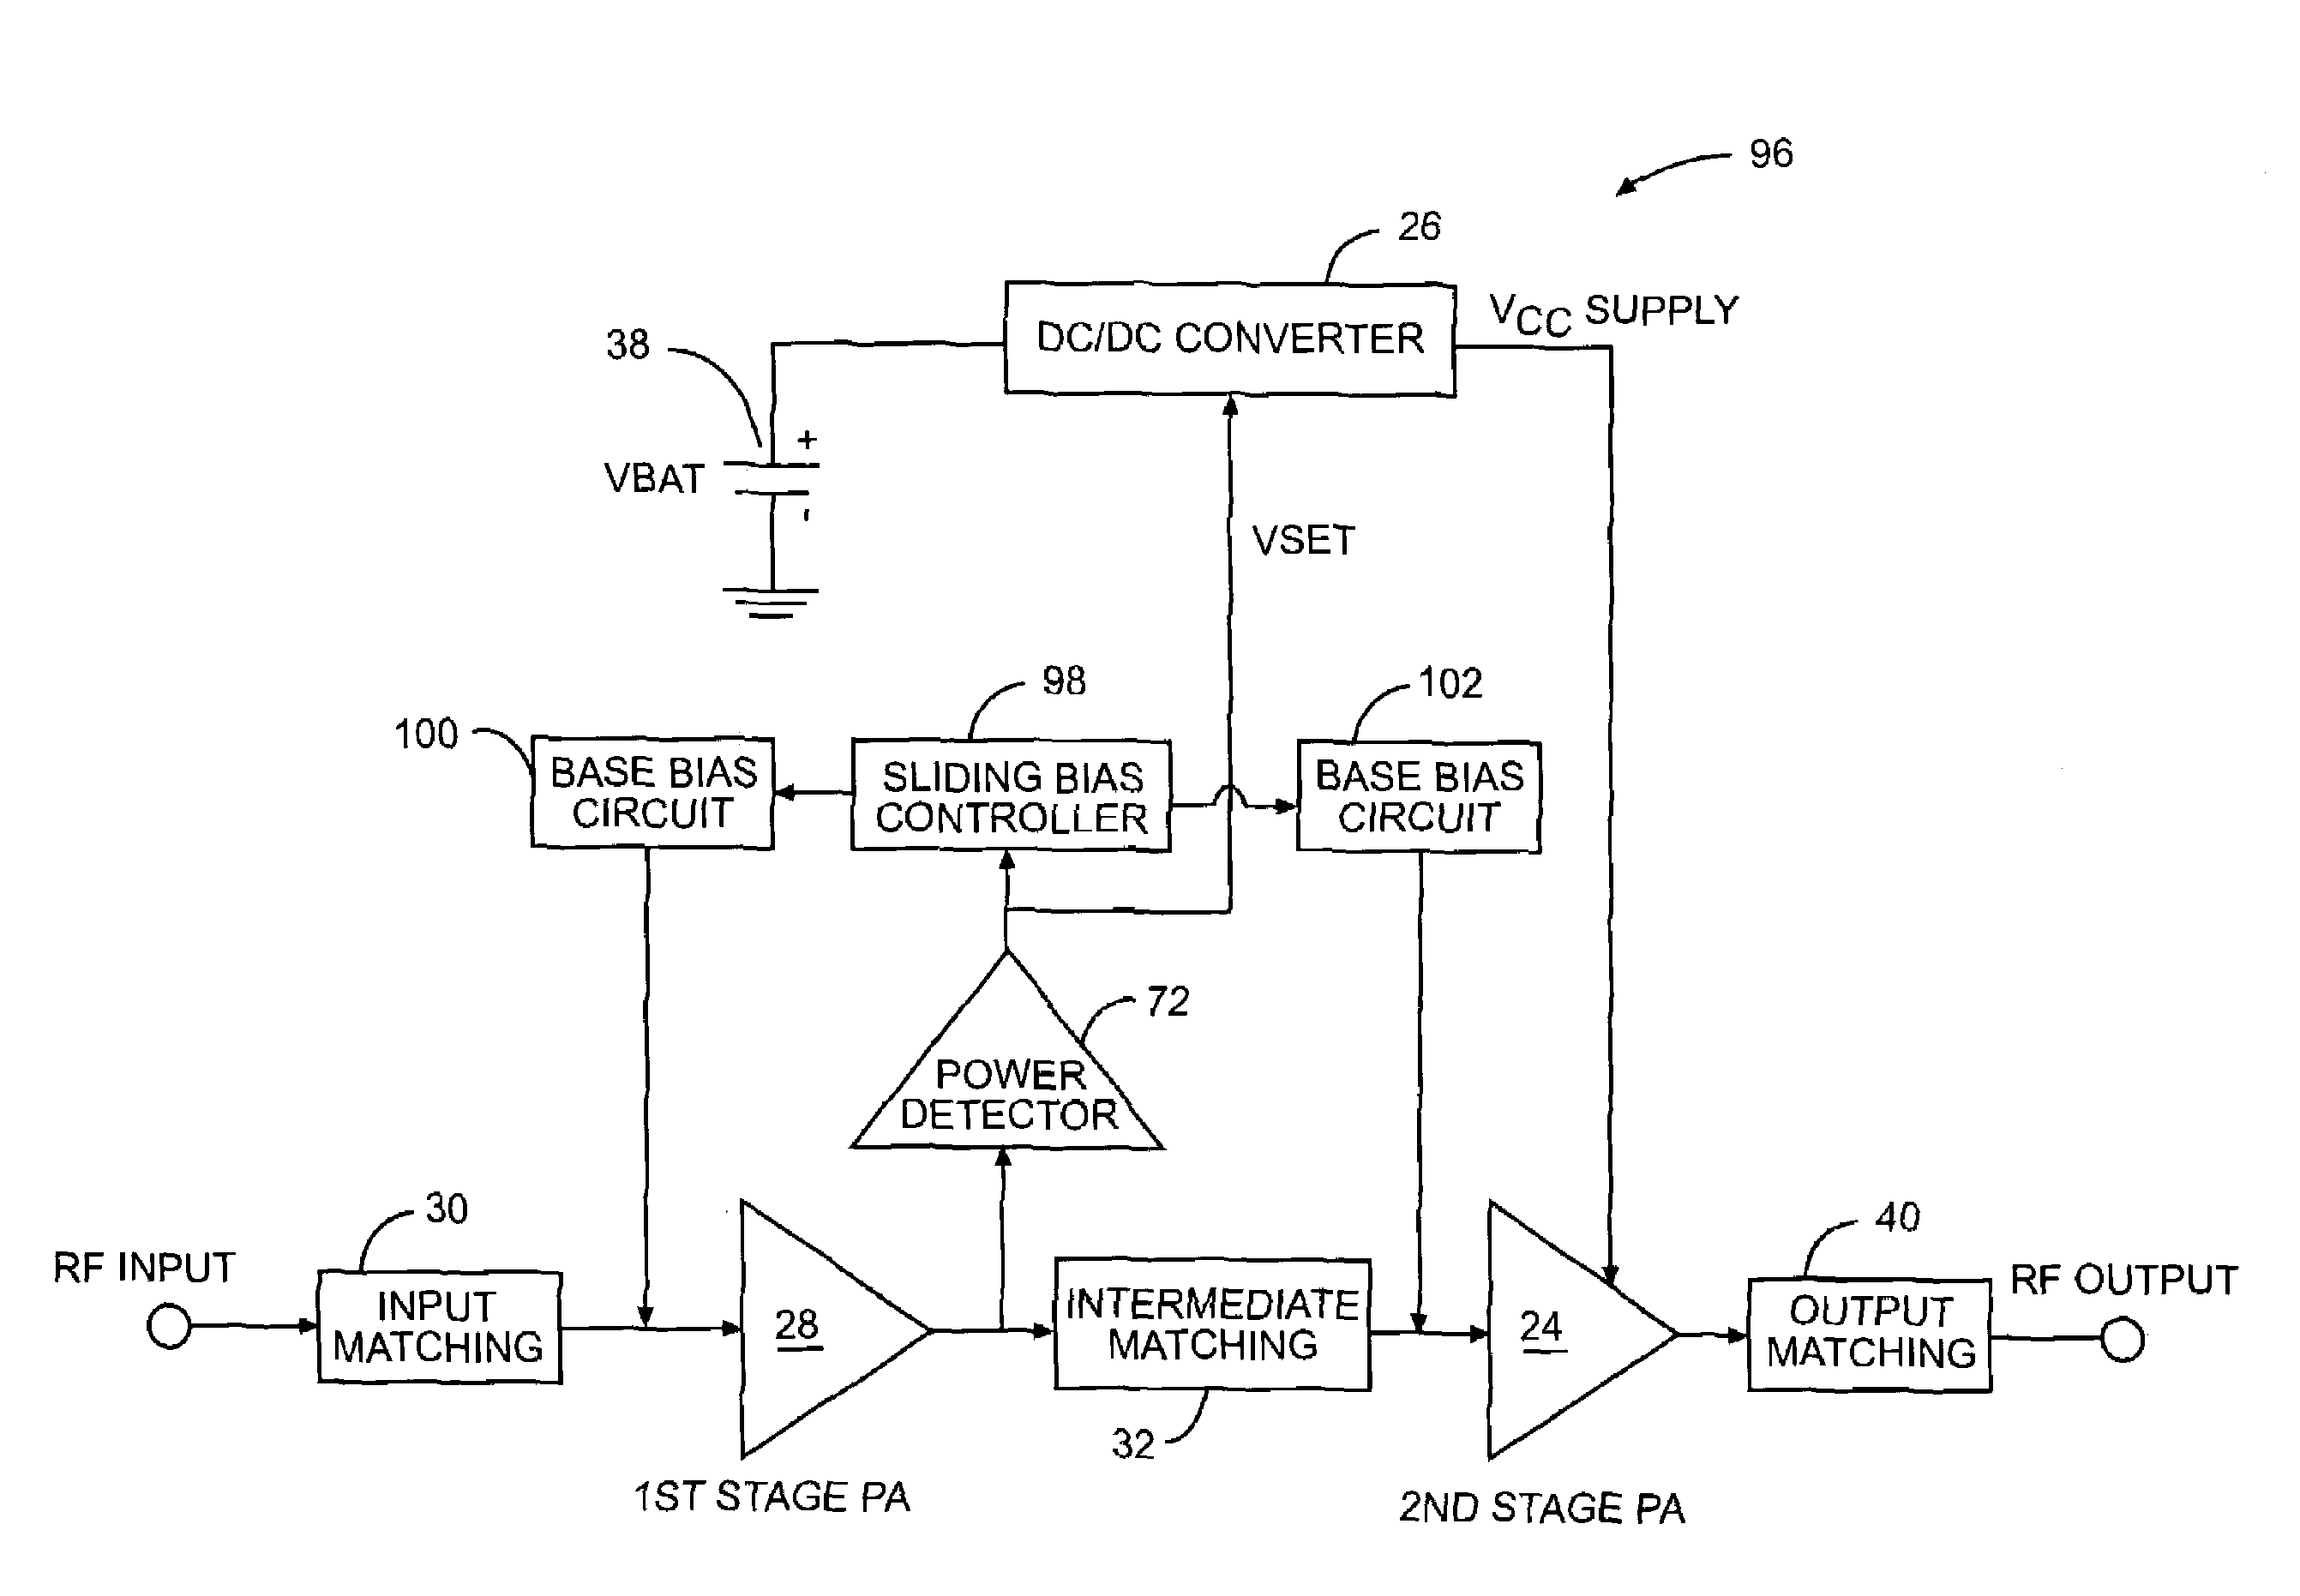 Sliding bias controller for use with radio frequency power amplifiers